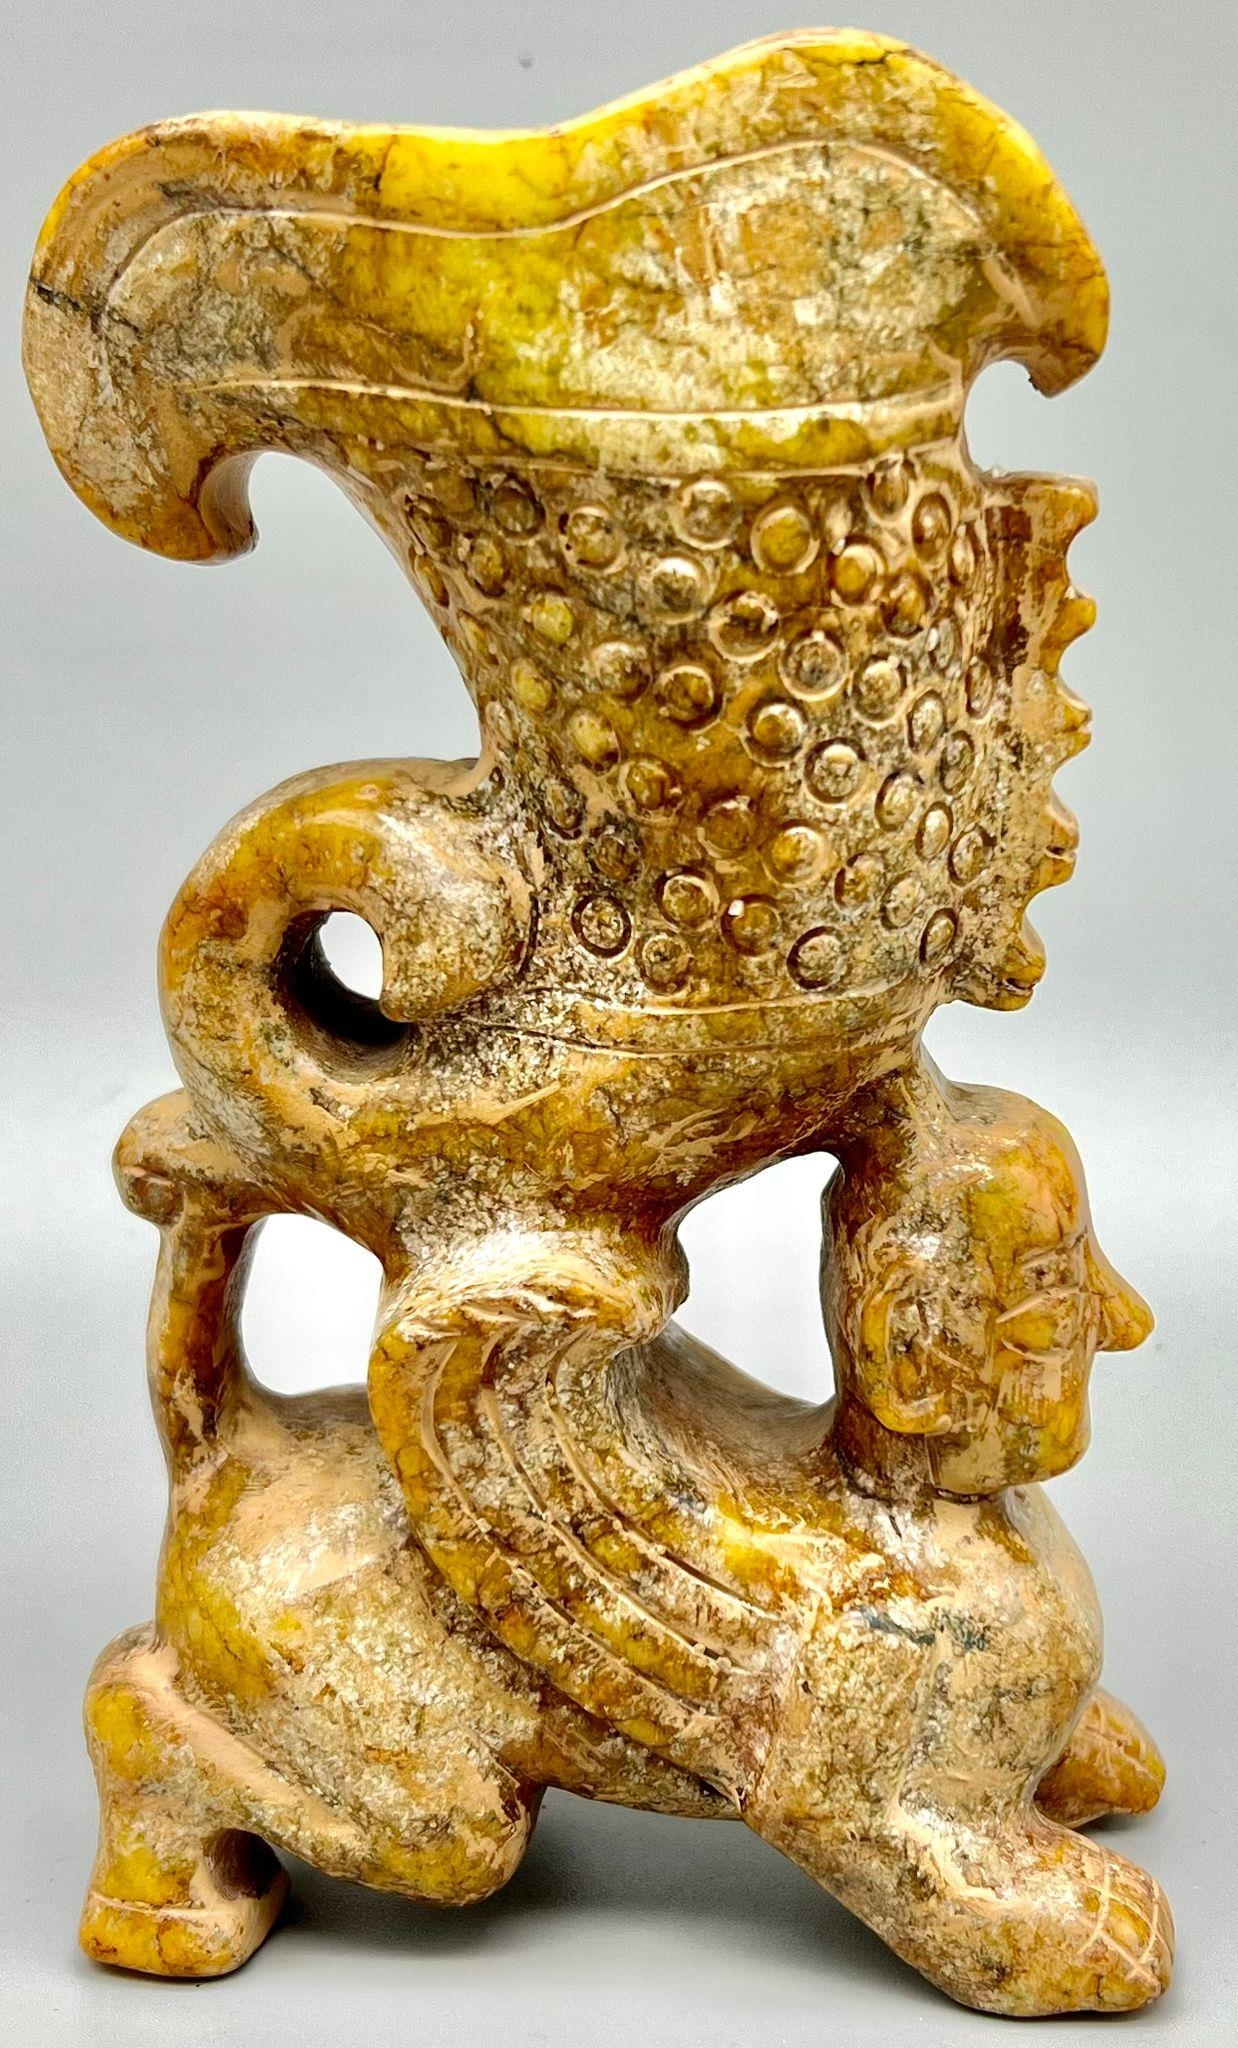 A Chinese, ceremonial, libation cup. Hand carved in great detail on hard stone (possibly jade), from